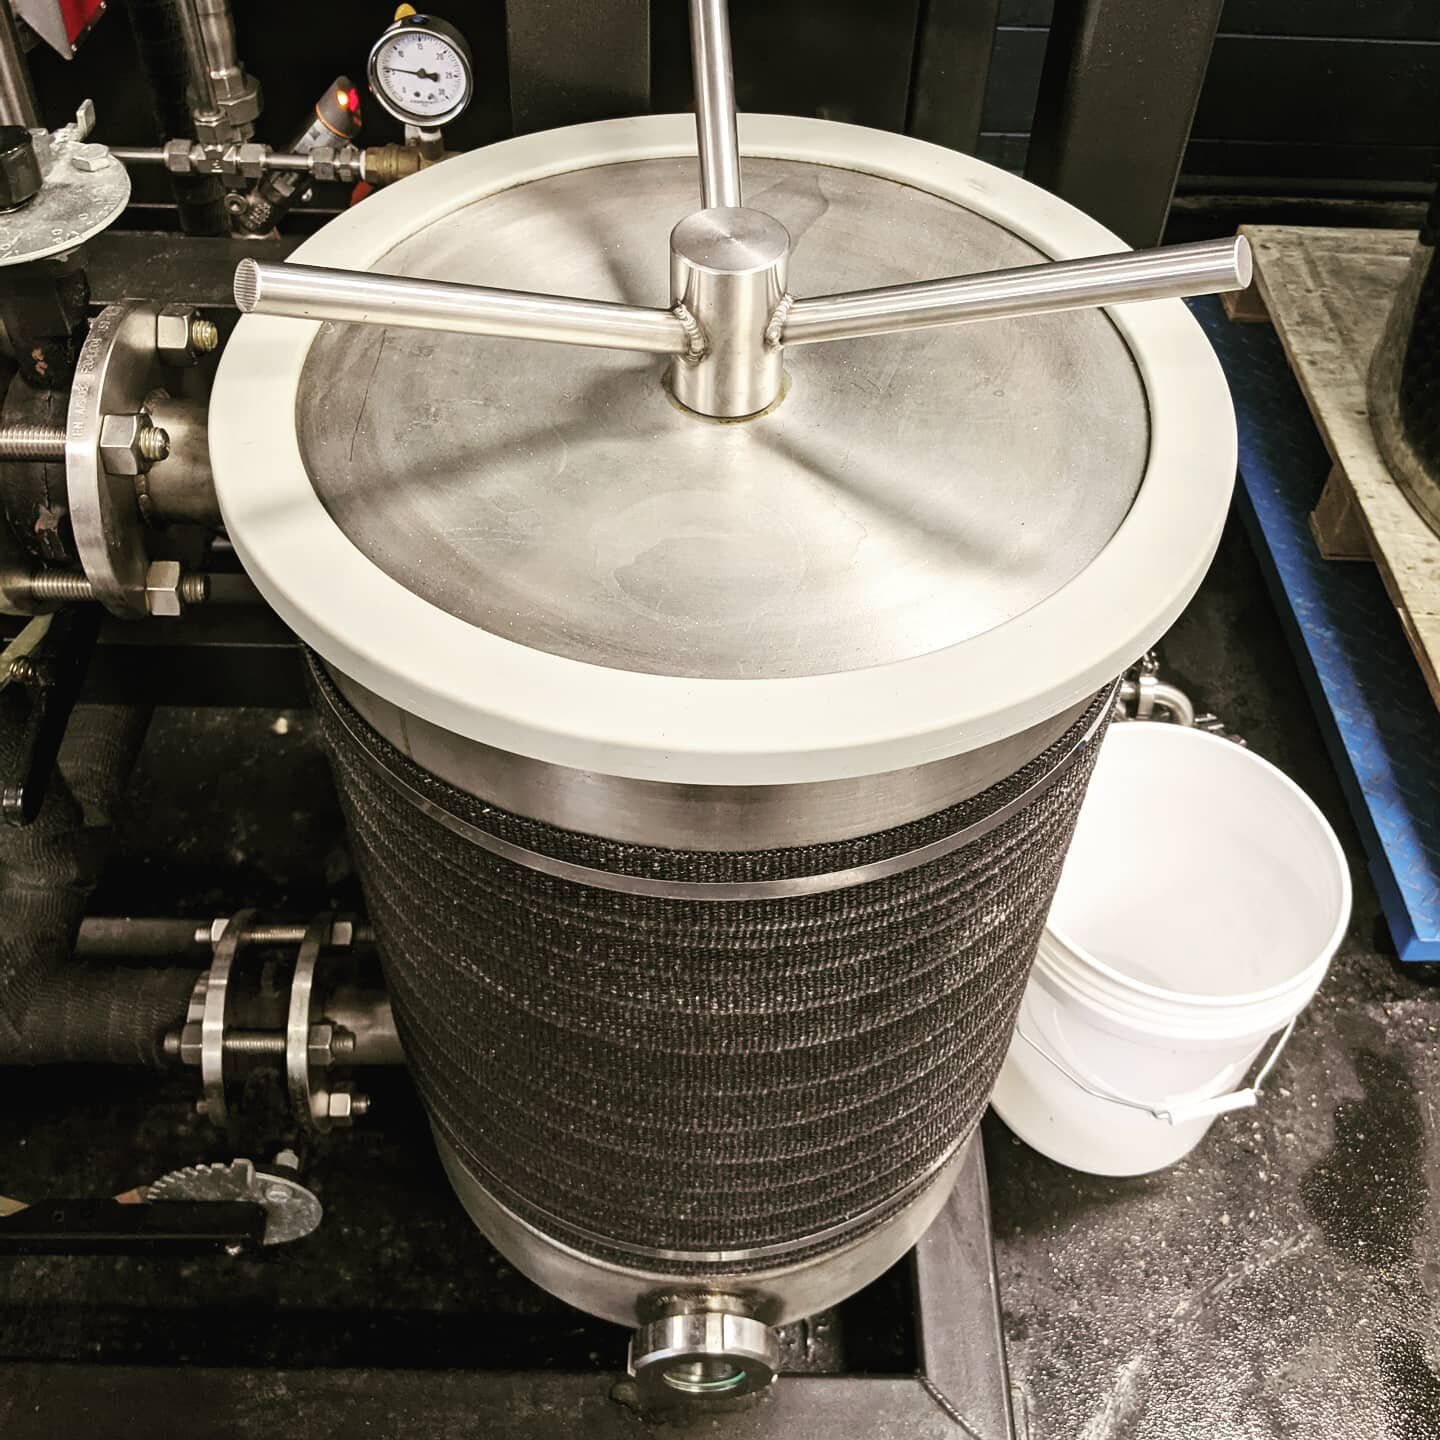 Why are these botanical baskets SO BIG? 

Vapor is ripping through the rest of the machine at 100 feet per second. The large diameter of the baskets slows down the vapor and allows for dwell time and proper extraction of ingredients. 

Alcohol is an 